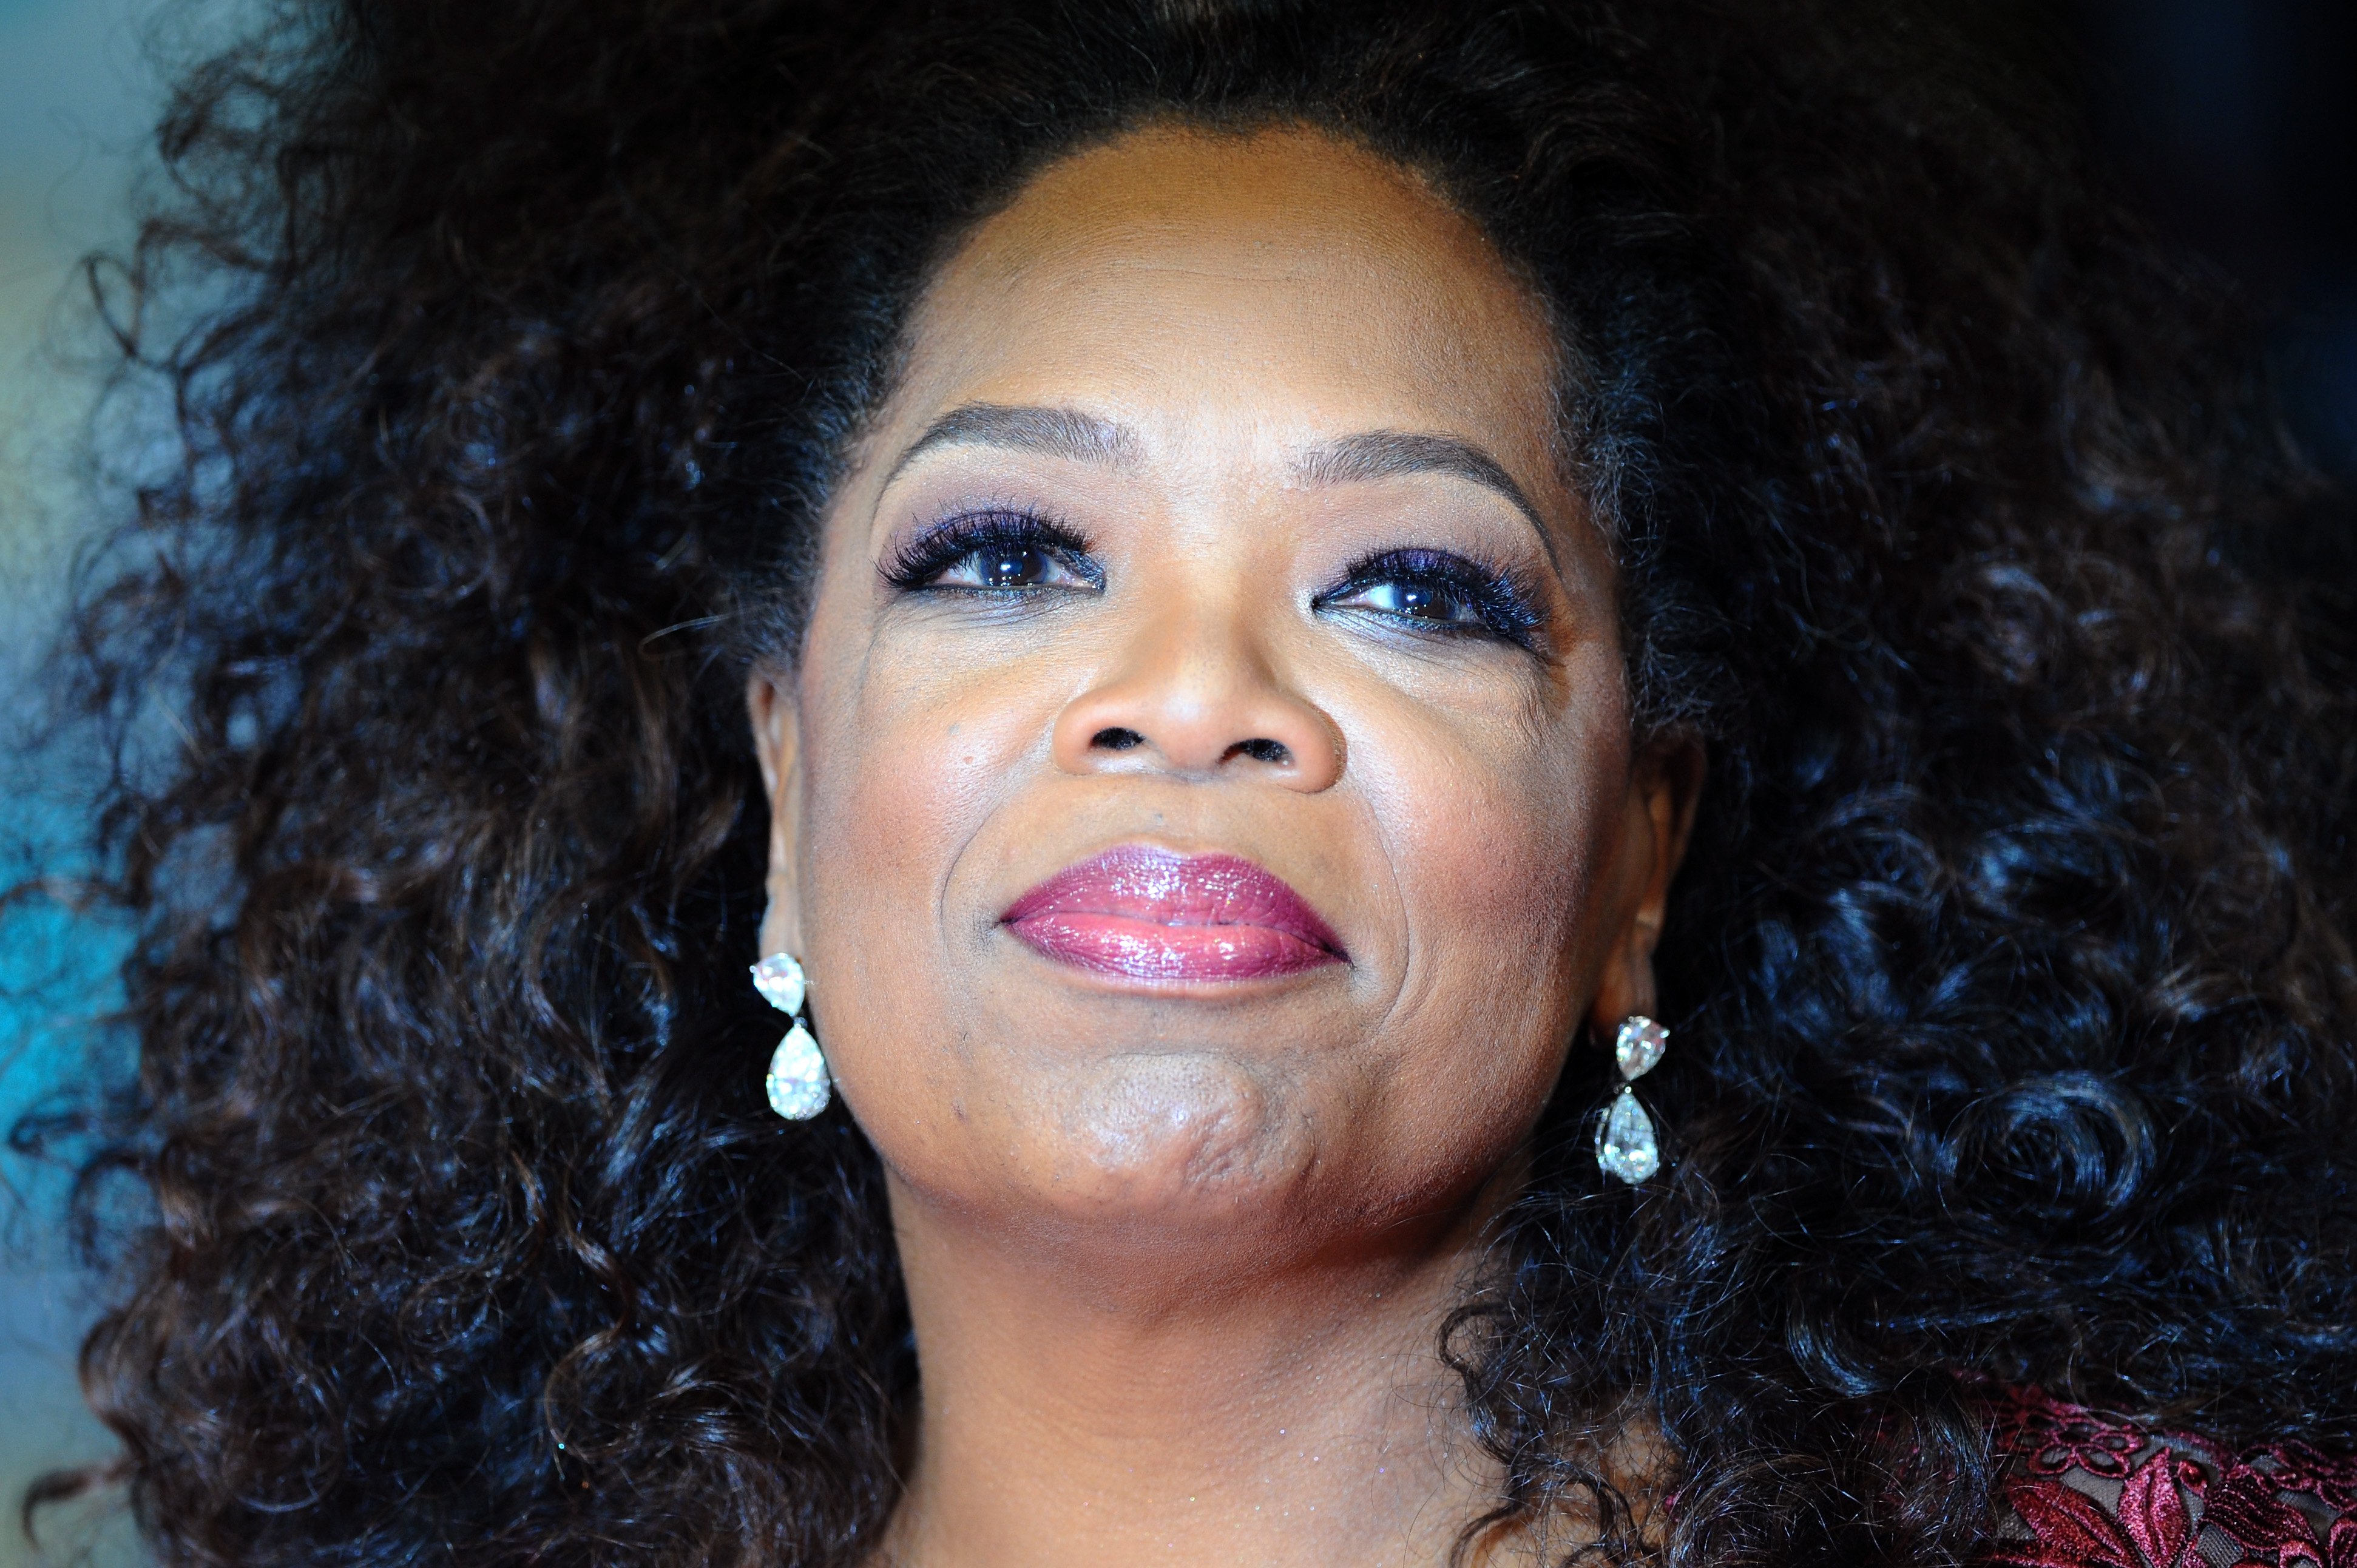 Oprah Winfrey attends the EE British Academy Film Awards 2014 at The Royal Opera House on February 16, 2014 in London, England. | Source: Getty Image